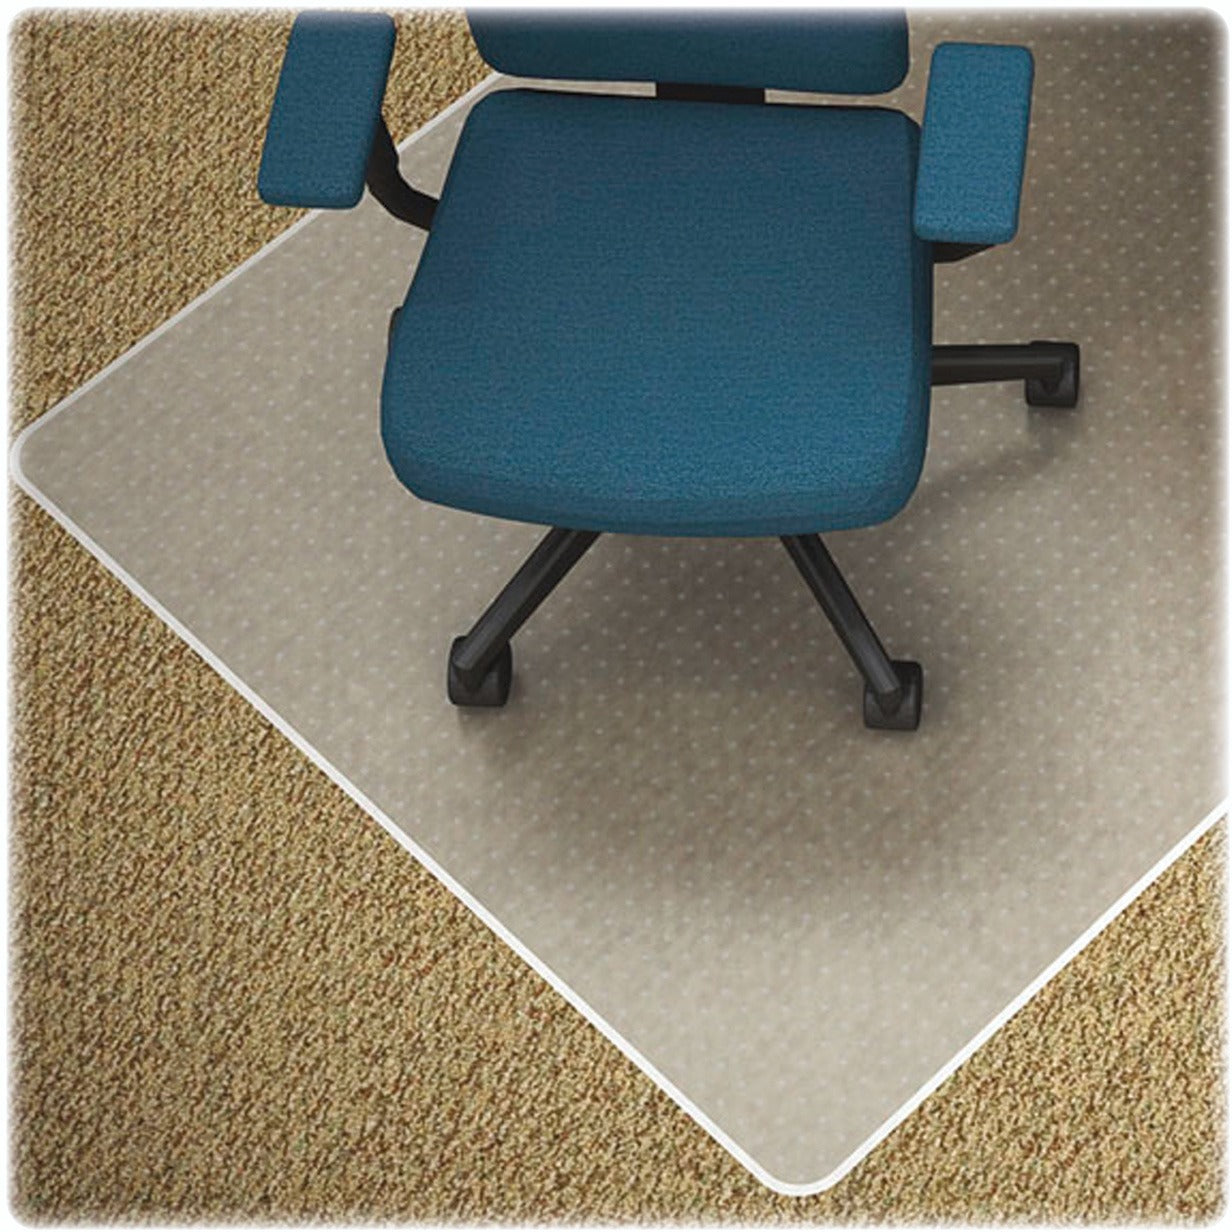 Lorell Standard Lip Low-pile Chairmat - Carpeted Floor - 48" Length x 36" Width x 0.112" Thickness - Lip Size 10" Length x 19" Width - Vinyl - Clear - 1Each - 